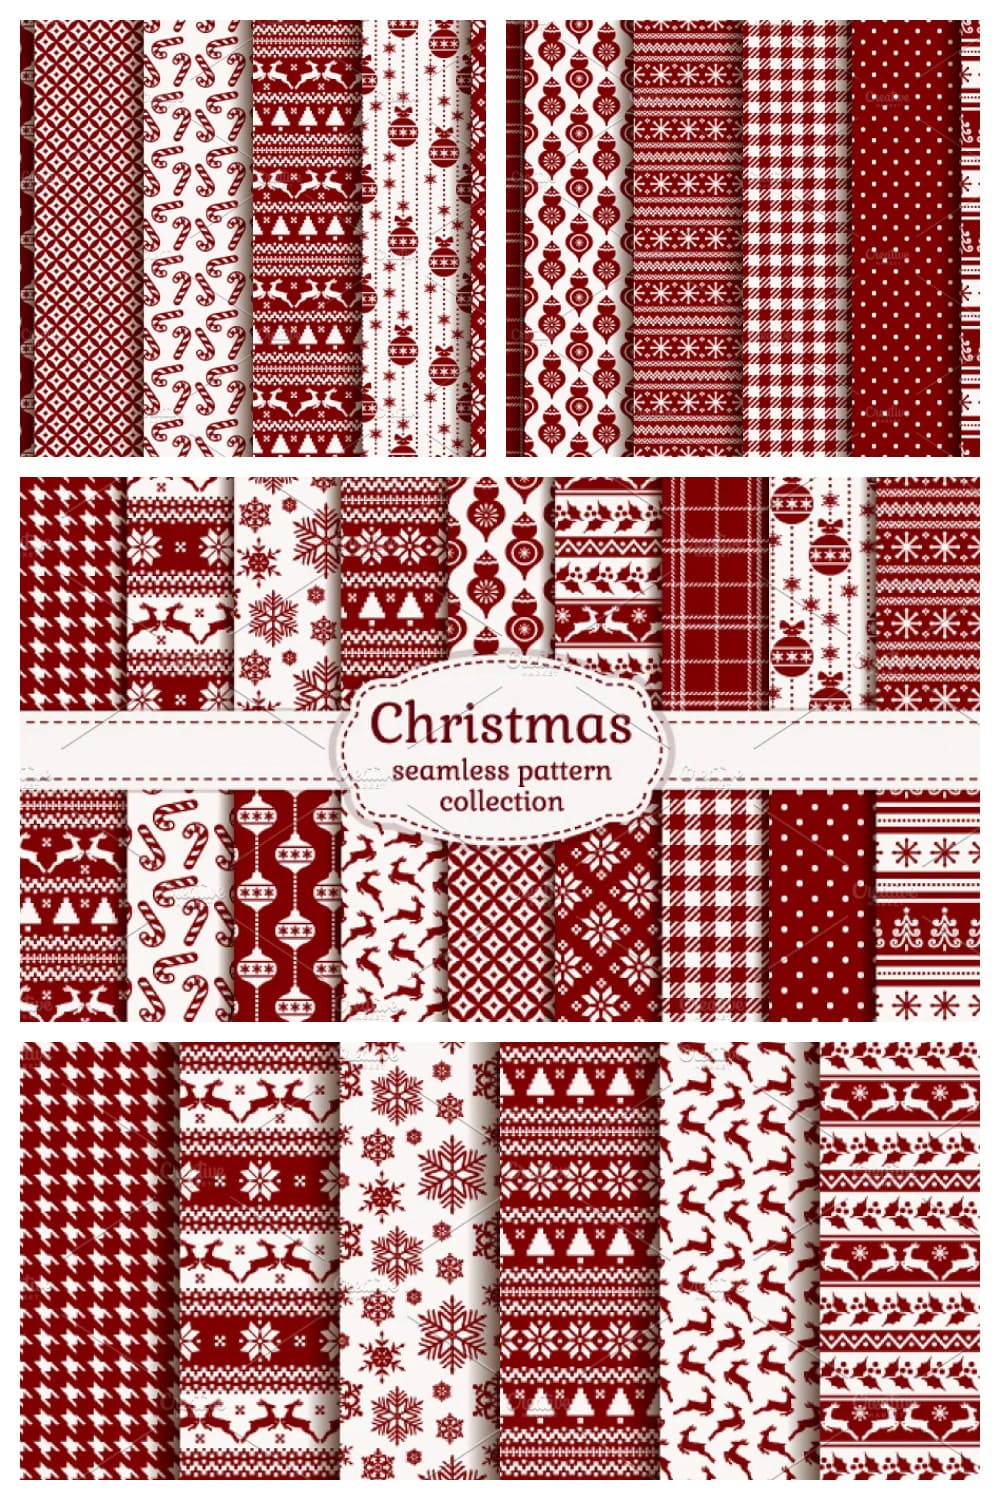 Christmas pattern in traditional ornament.